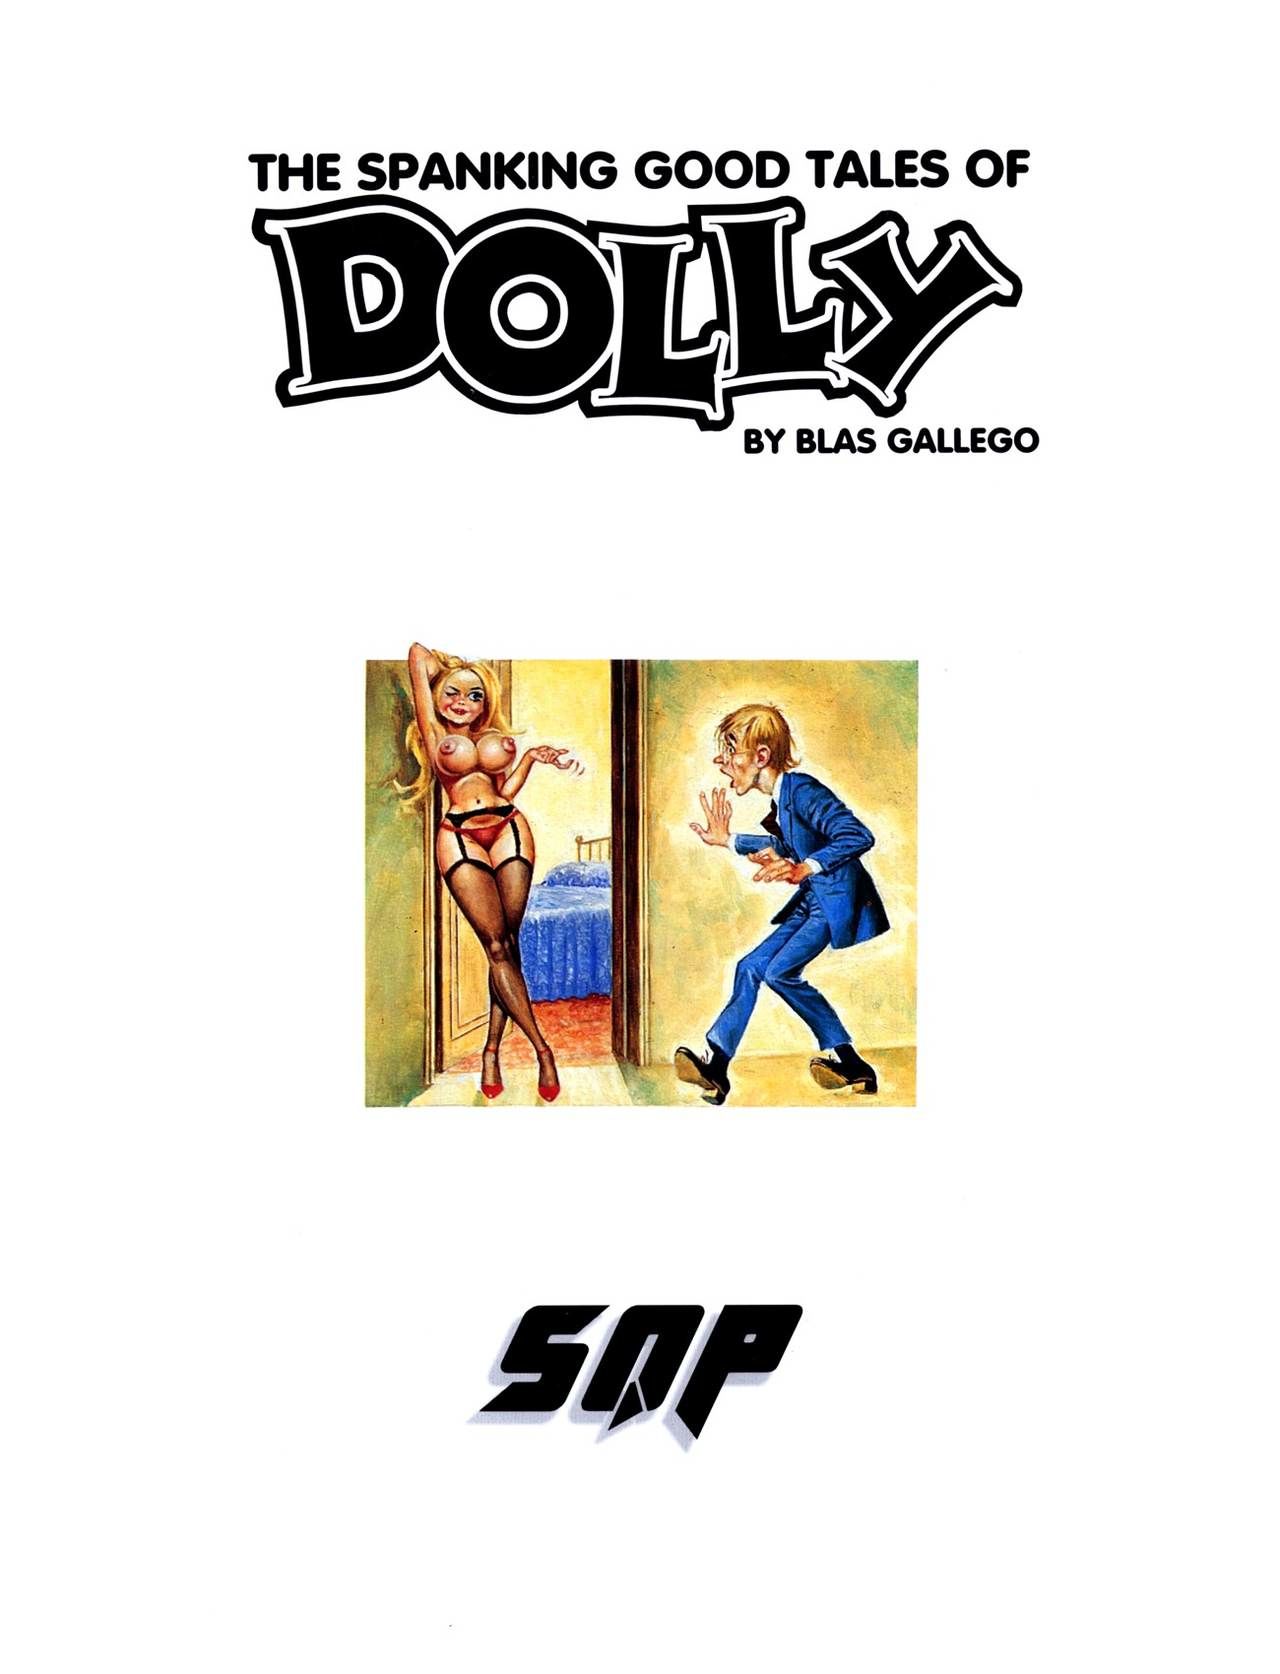 The Spanking Good Tales of Dolly by Blas Gallego page 2